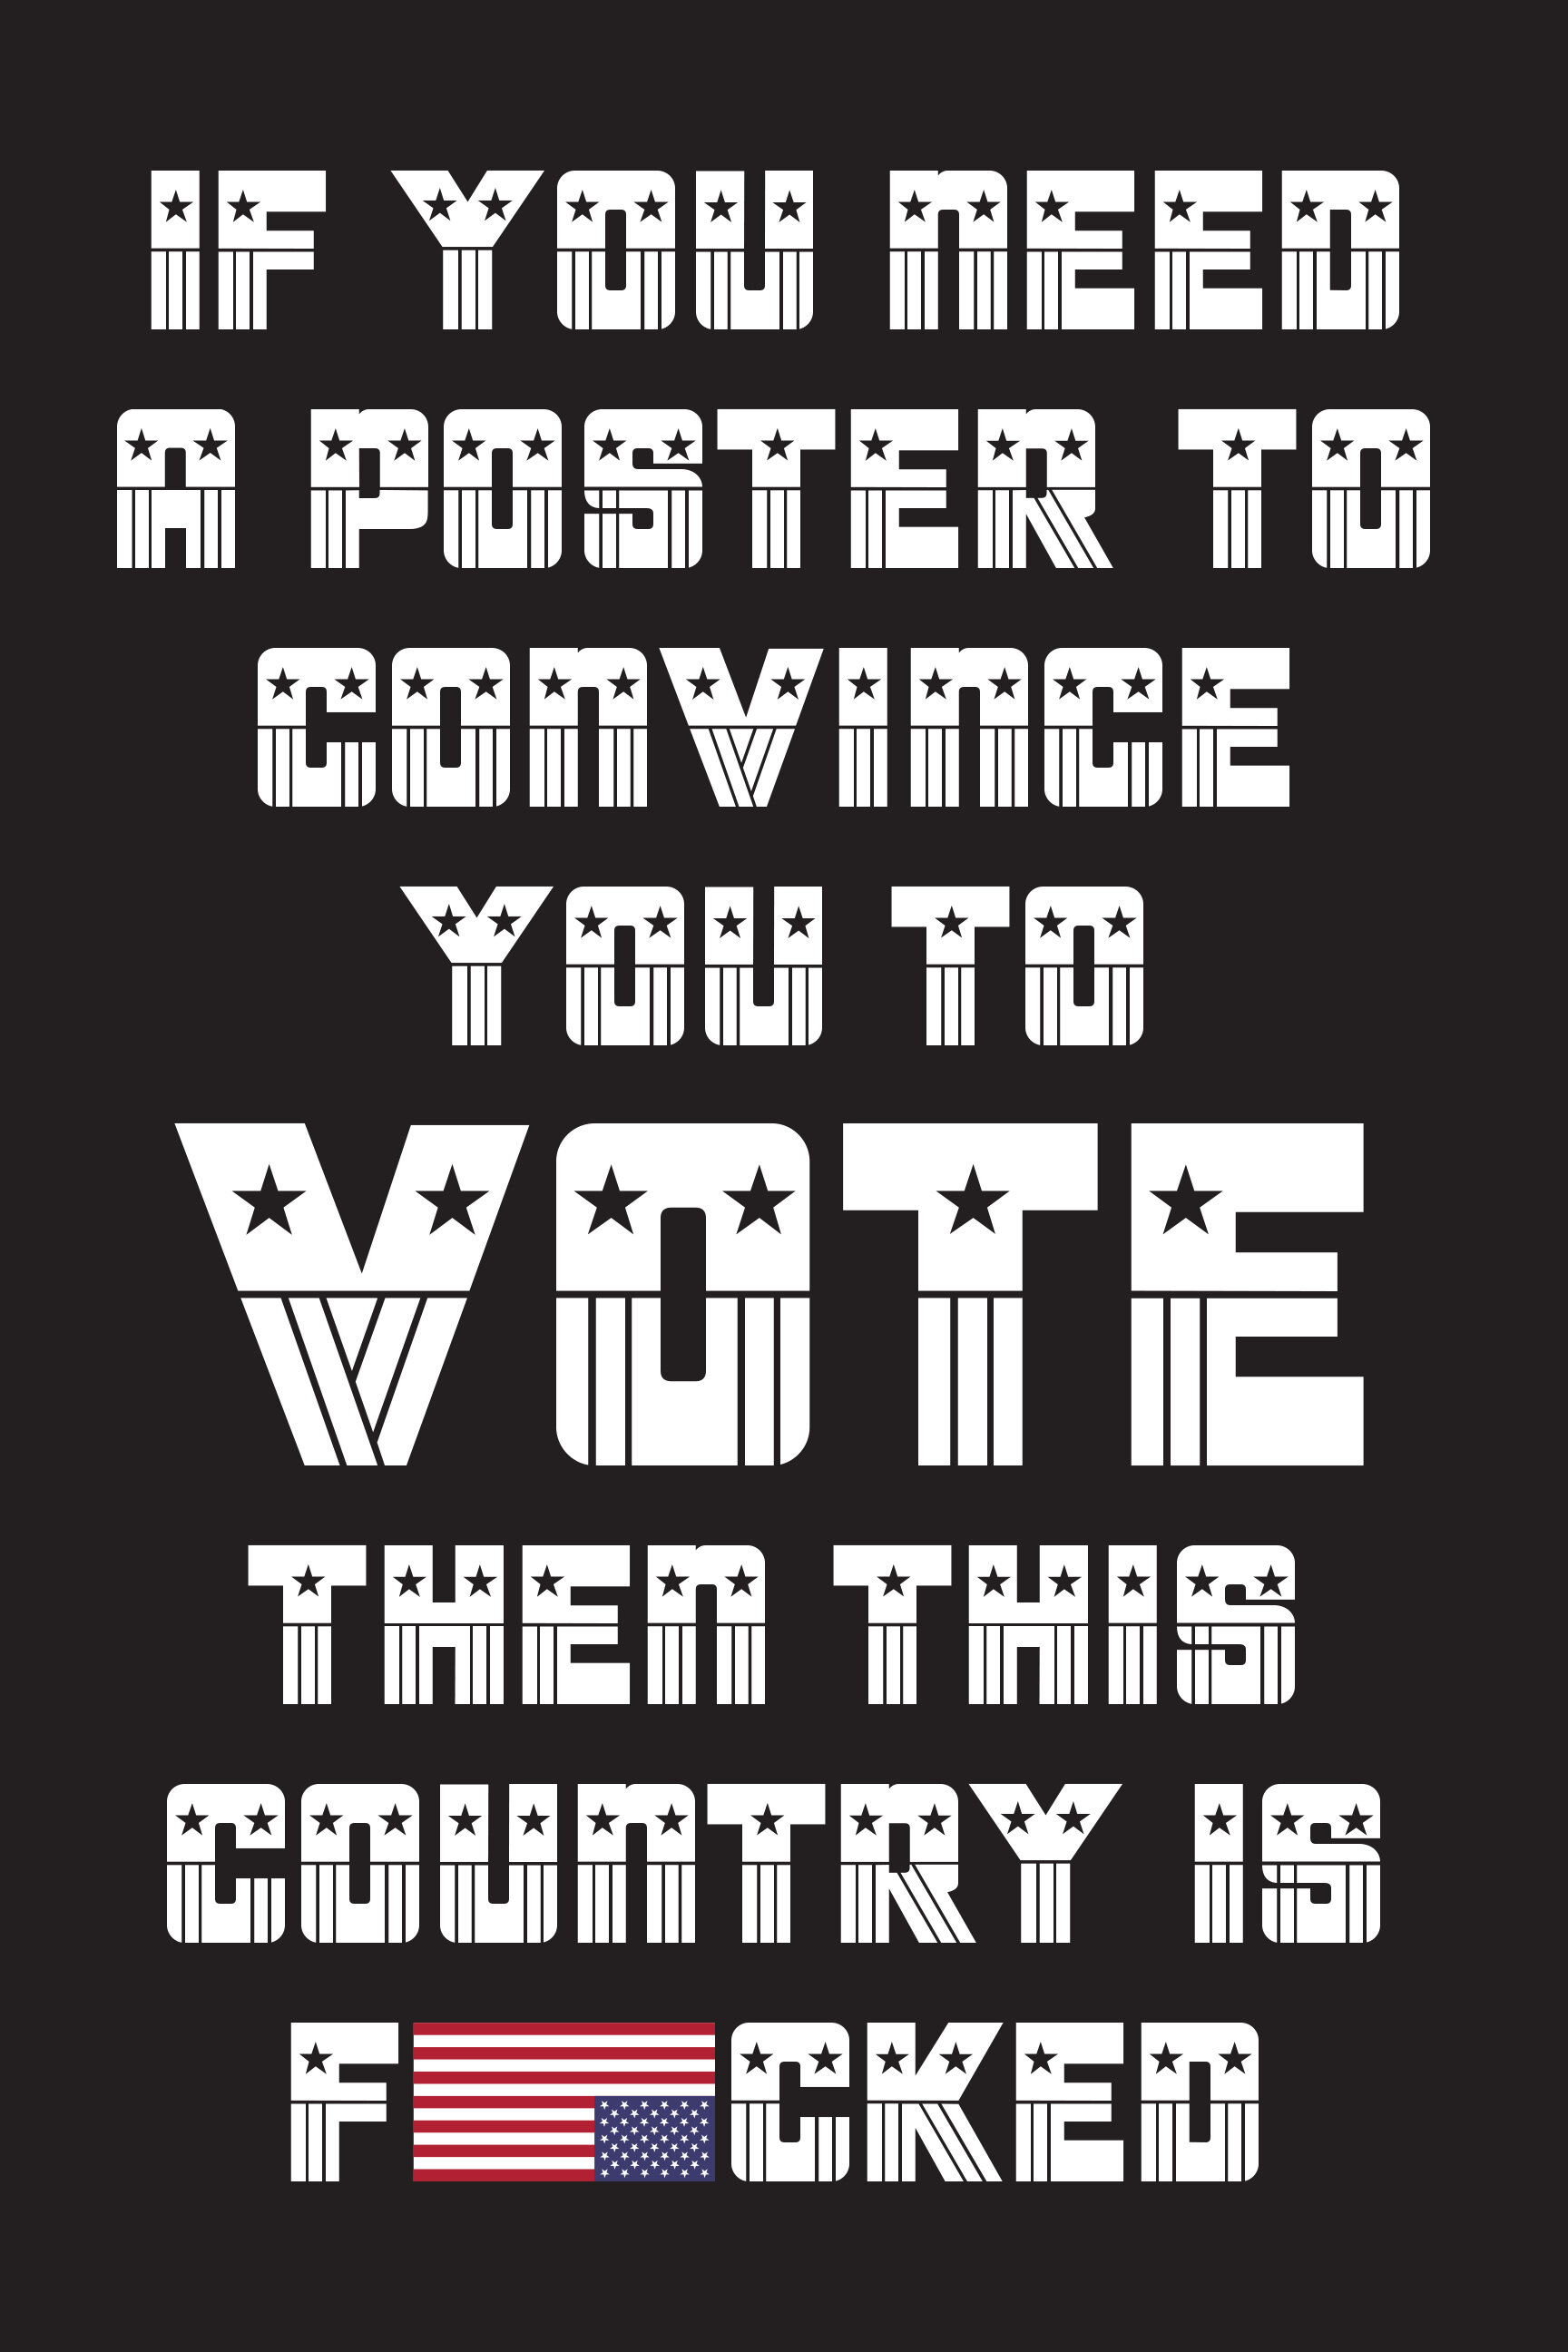 voting-protest-poster-2020_1728x2592.jpg